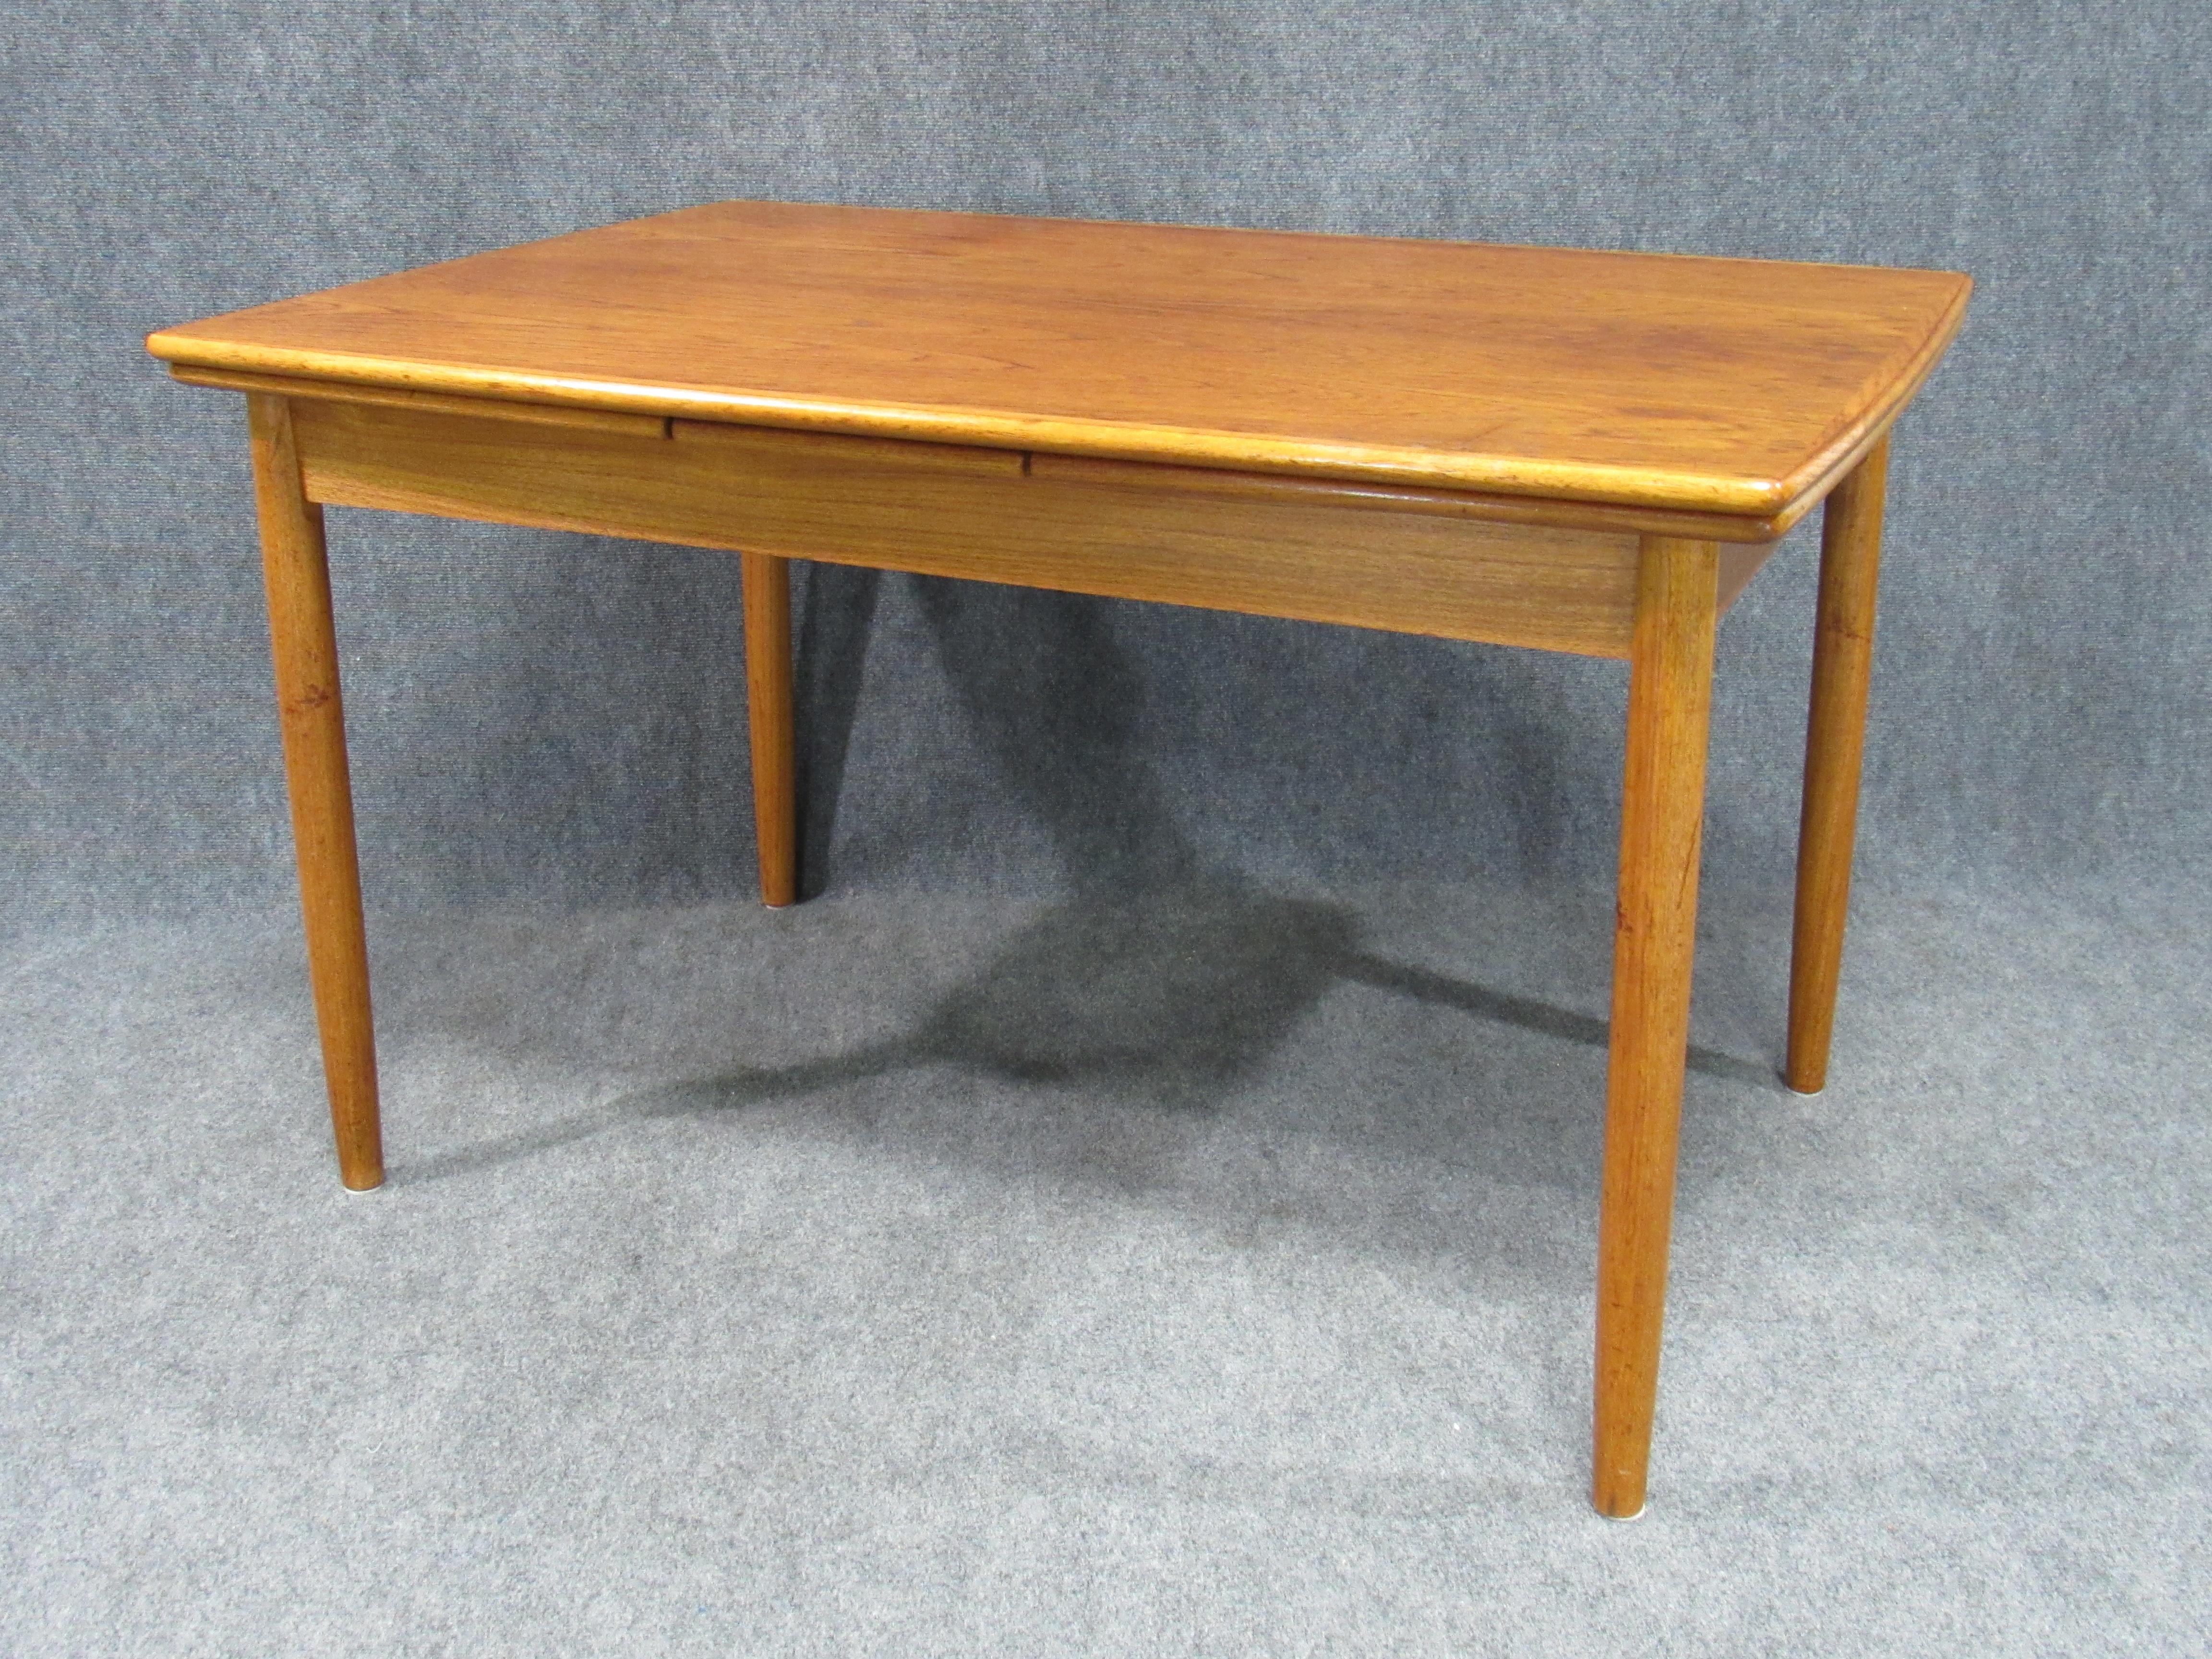 Midcentury Danish Modern Teak Dining Table with Two Pull-Out Leaves 3